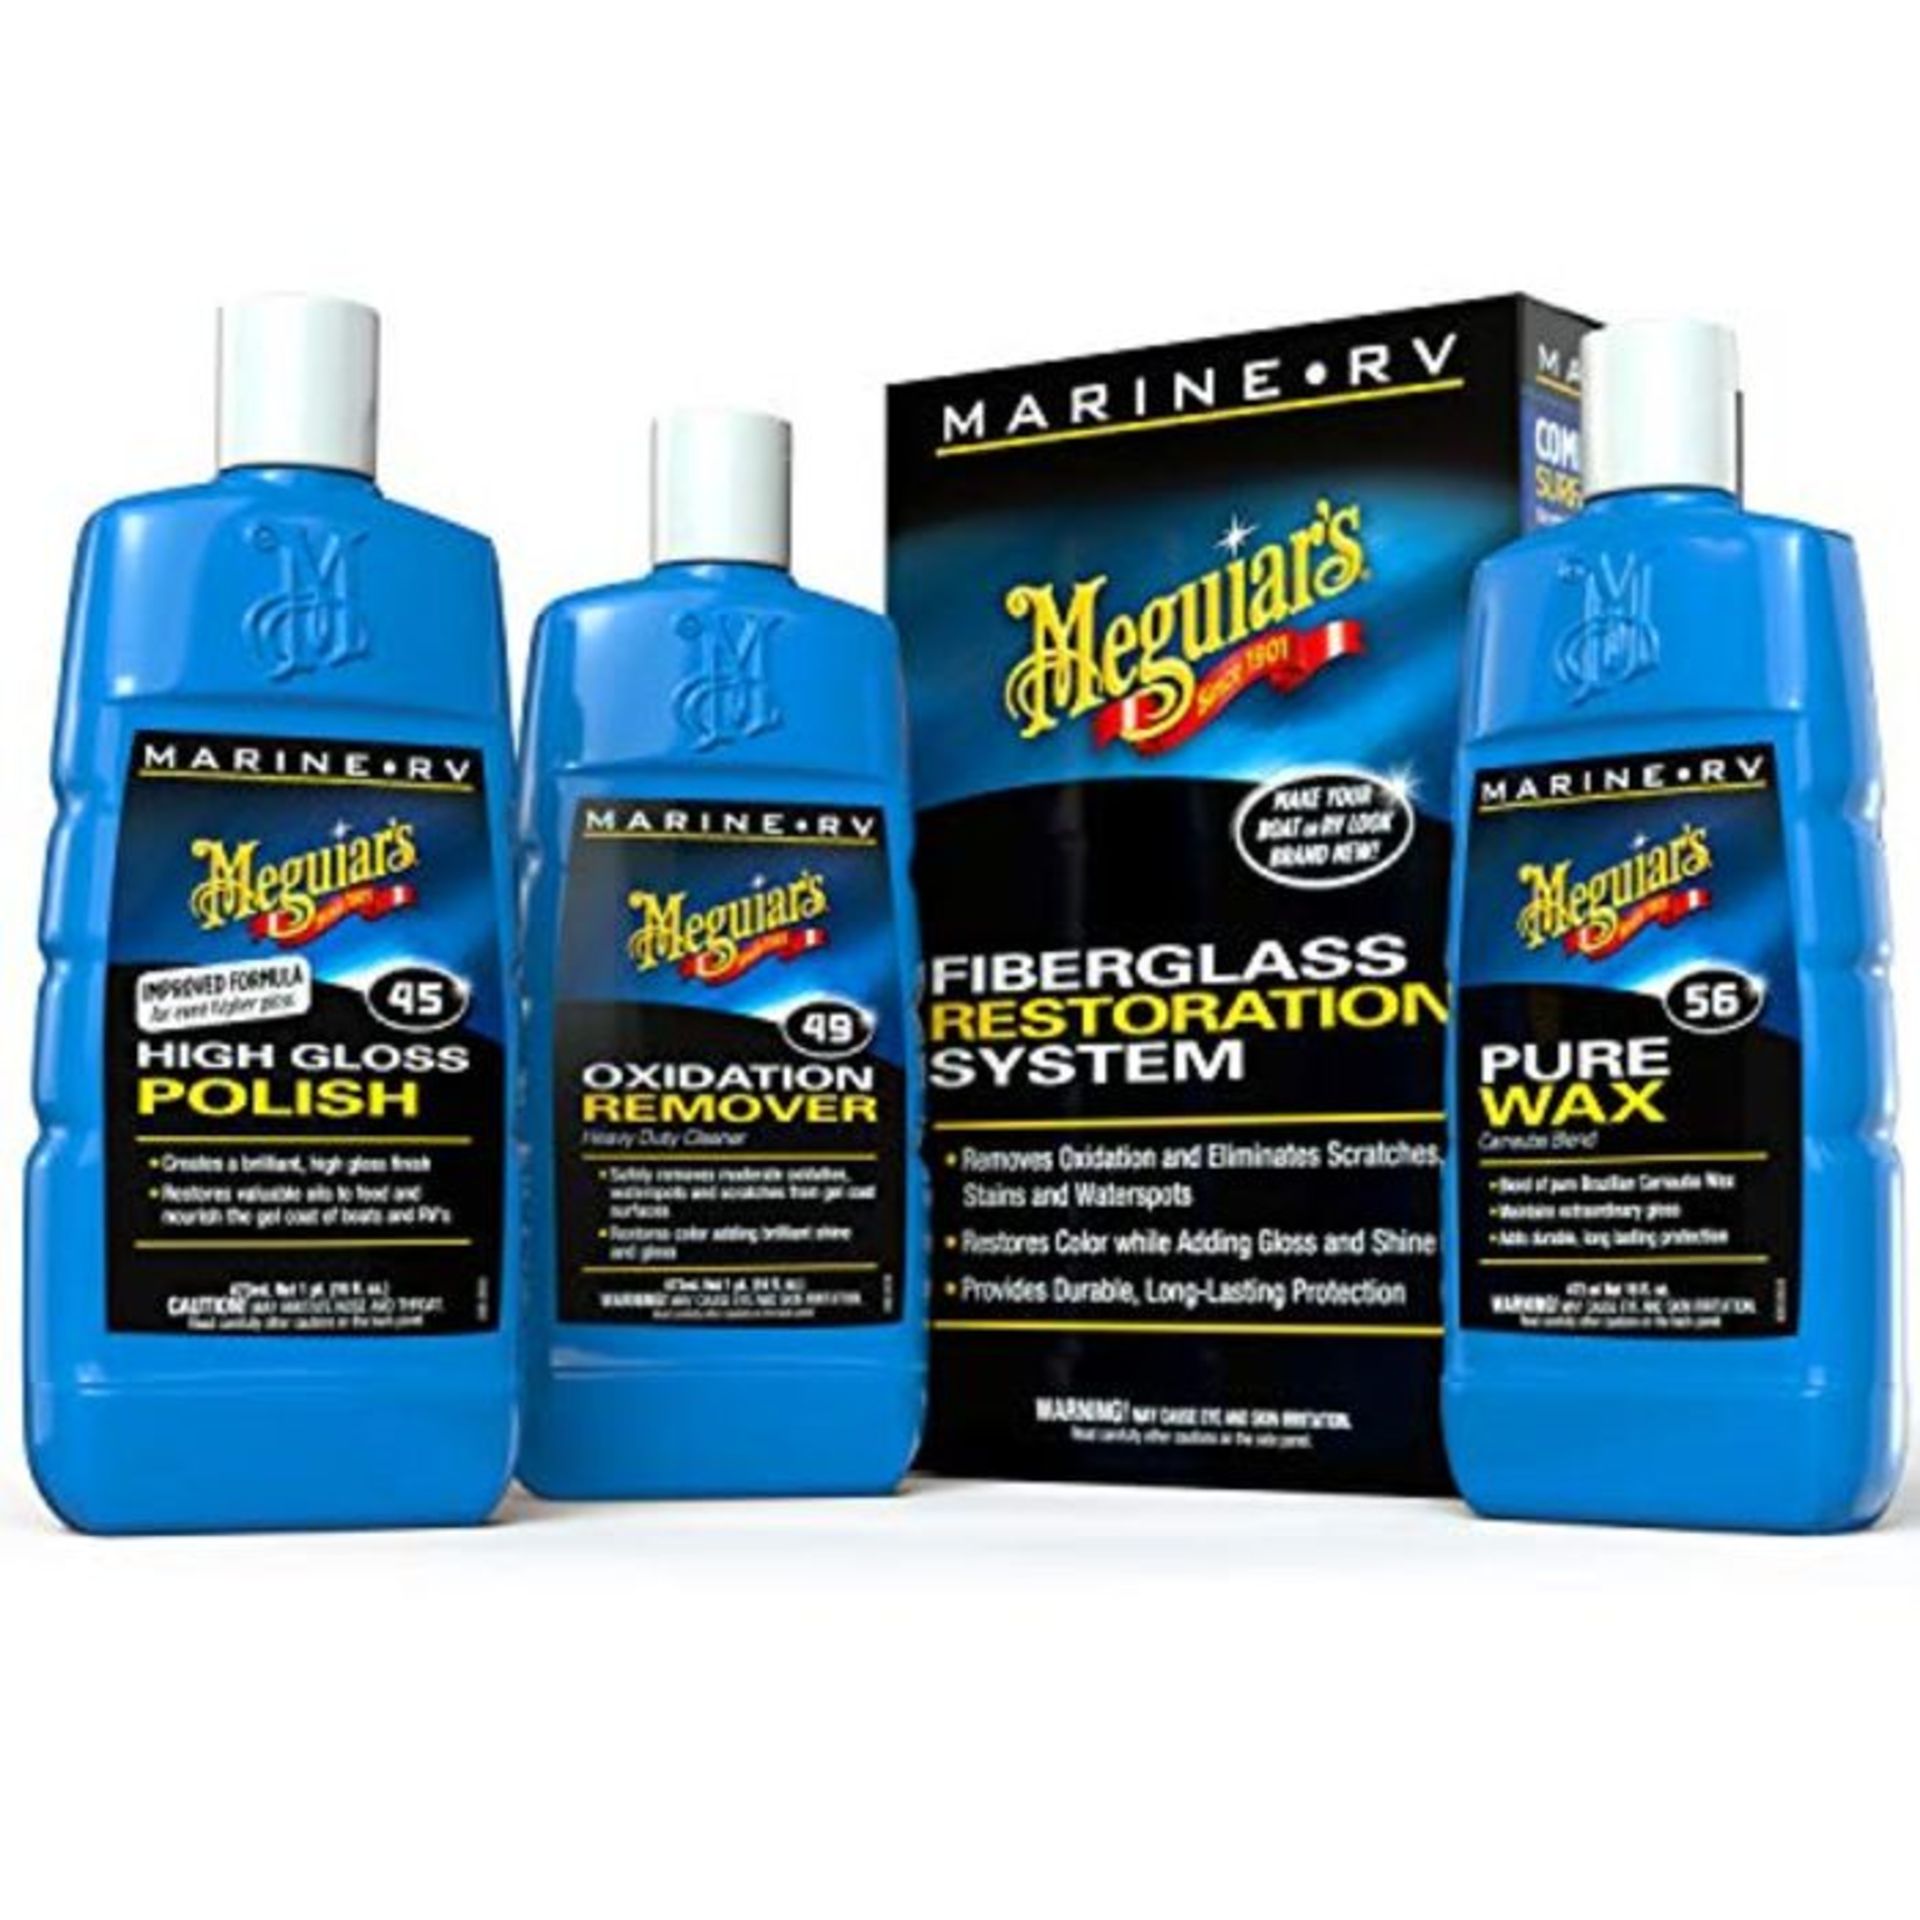 RRP £60.00 Meguiar's Marine RV 49 Boat Restoration System M4965 Kit contains Oxidation Remover, H